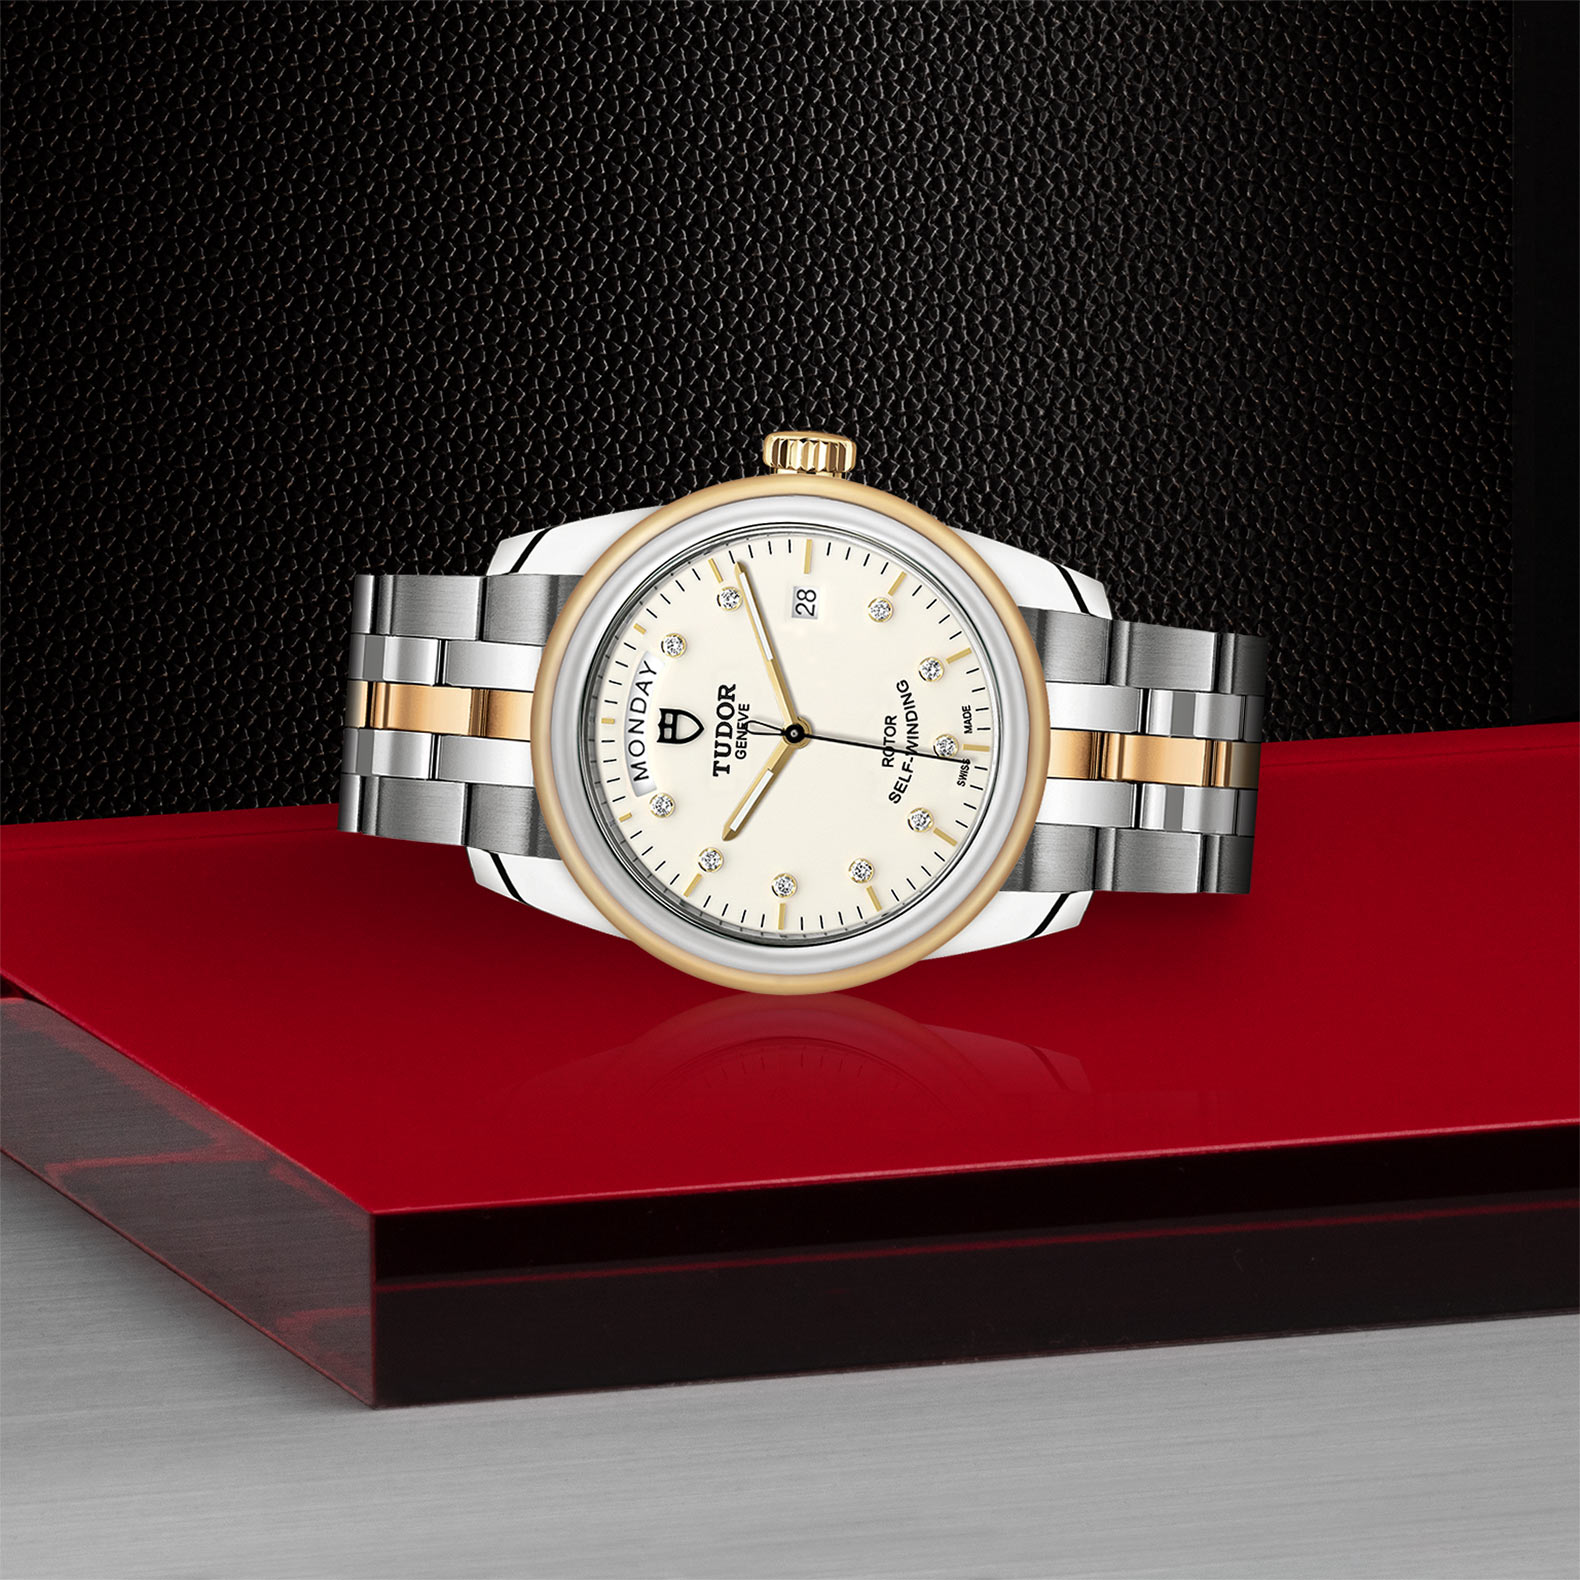 Tudor Glamour Date+Day M56003-0113